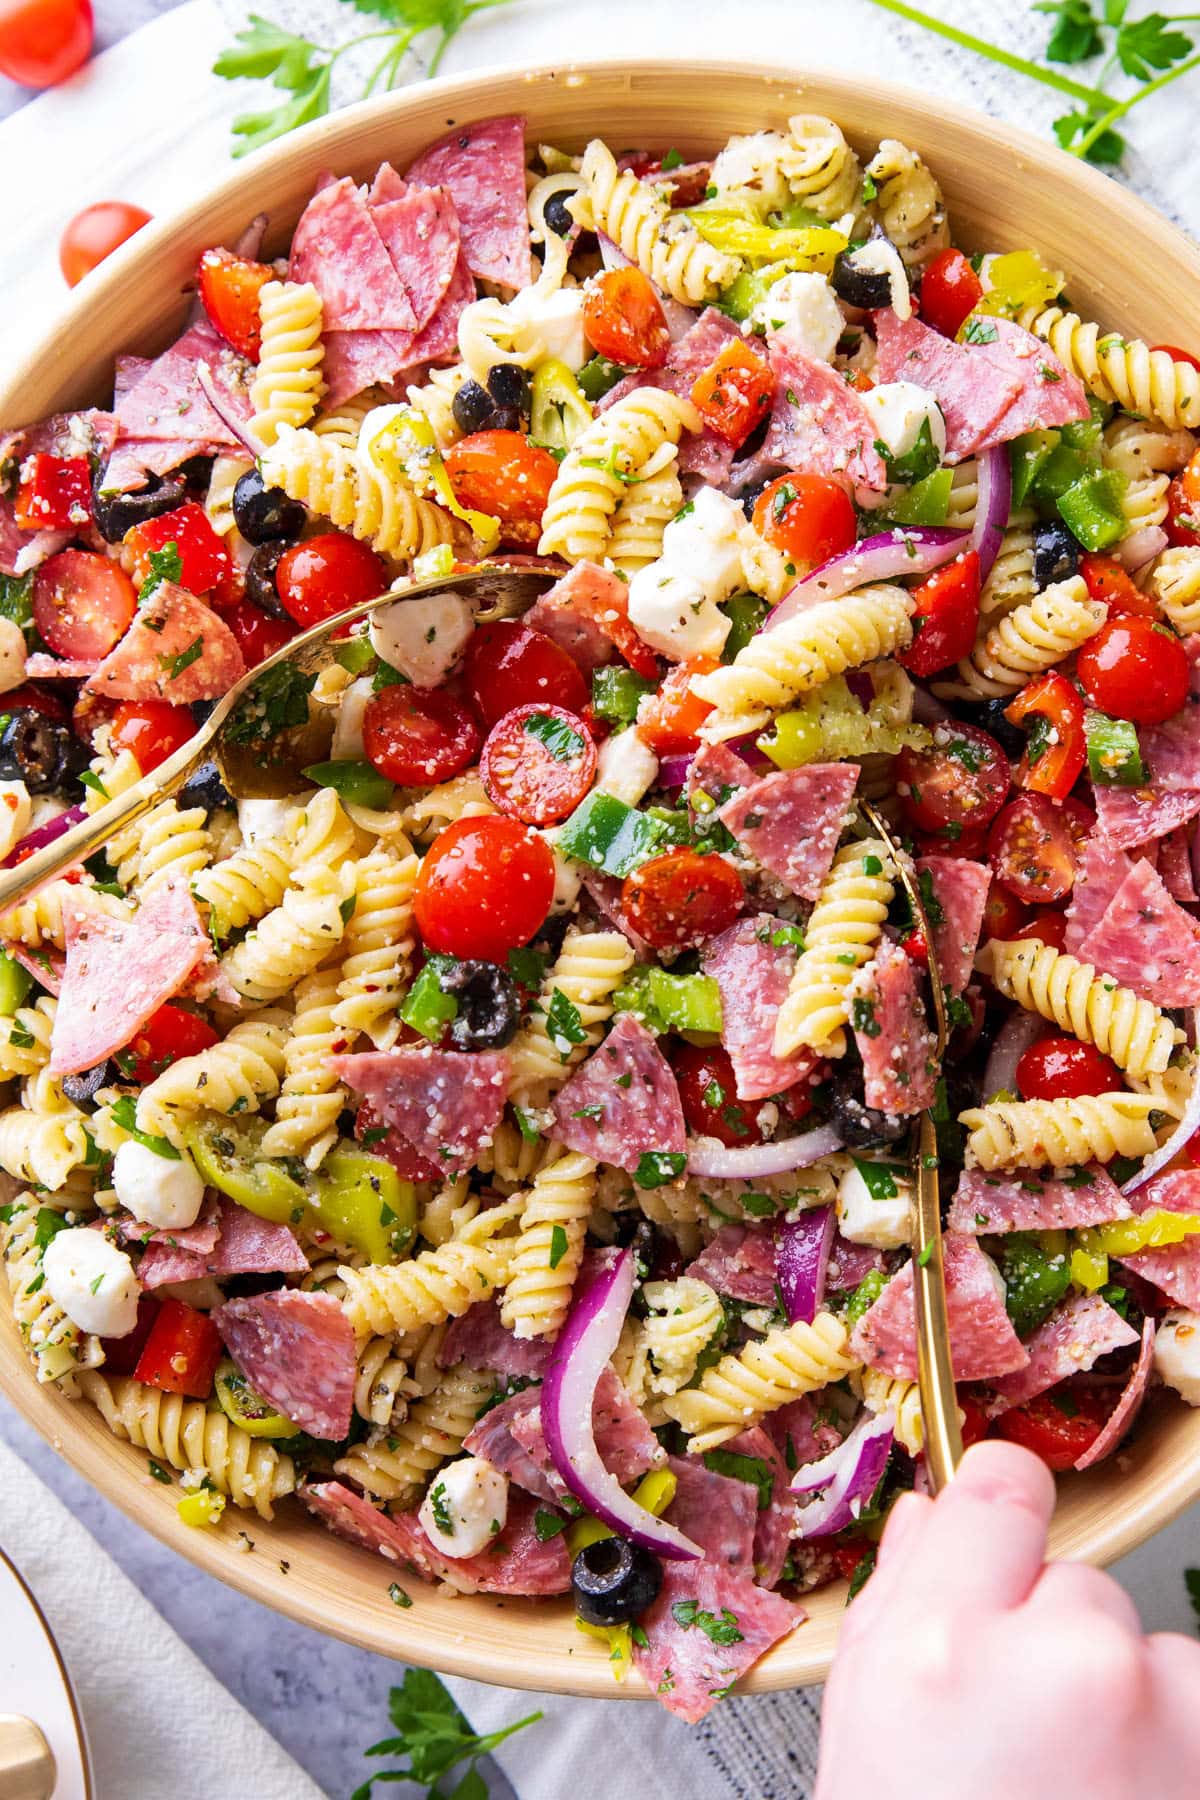 A large serving bowl filled with Italian pasta salad featuring juicy tomatoes, fresh parsley, flavorful salami, mozzarella pearls, bell peppers, and delicious Italian dressing